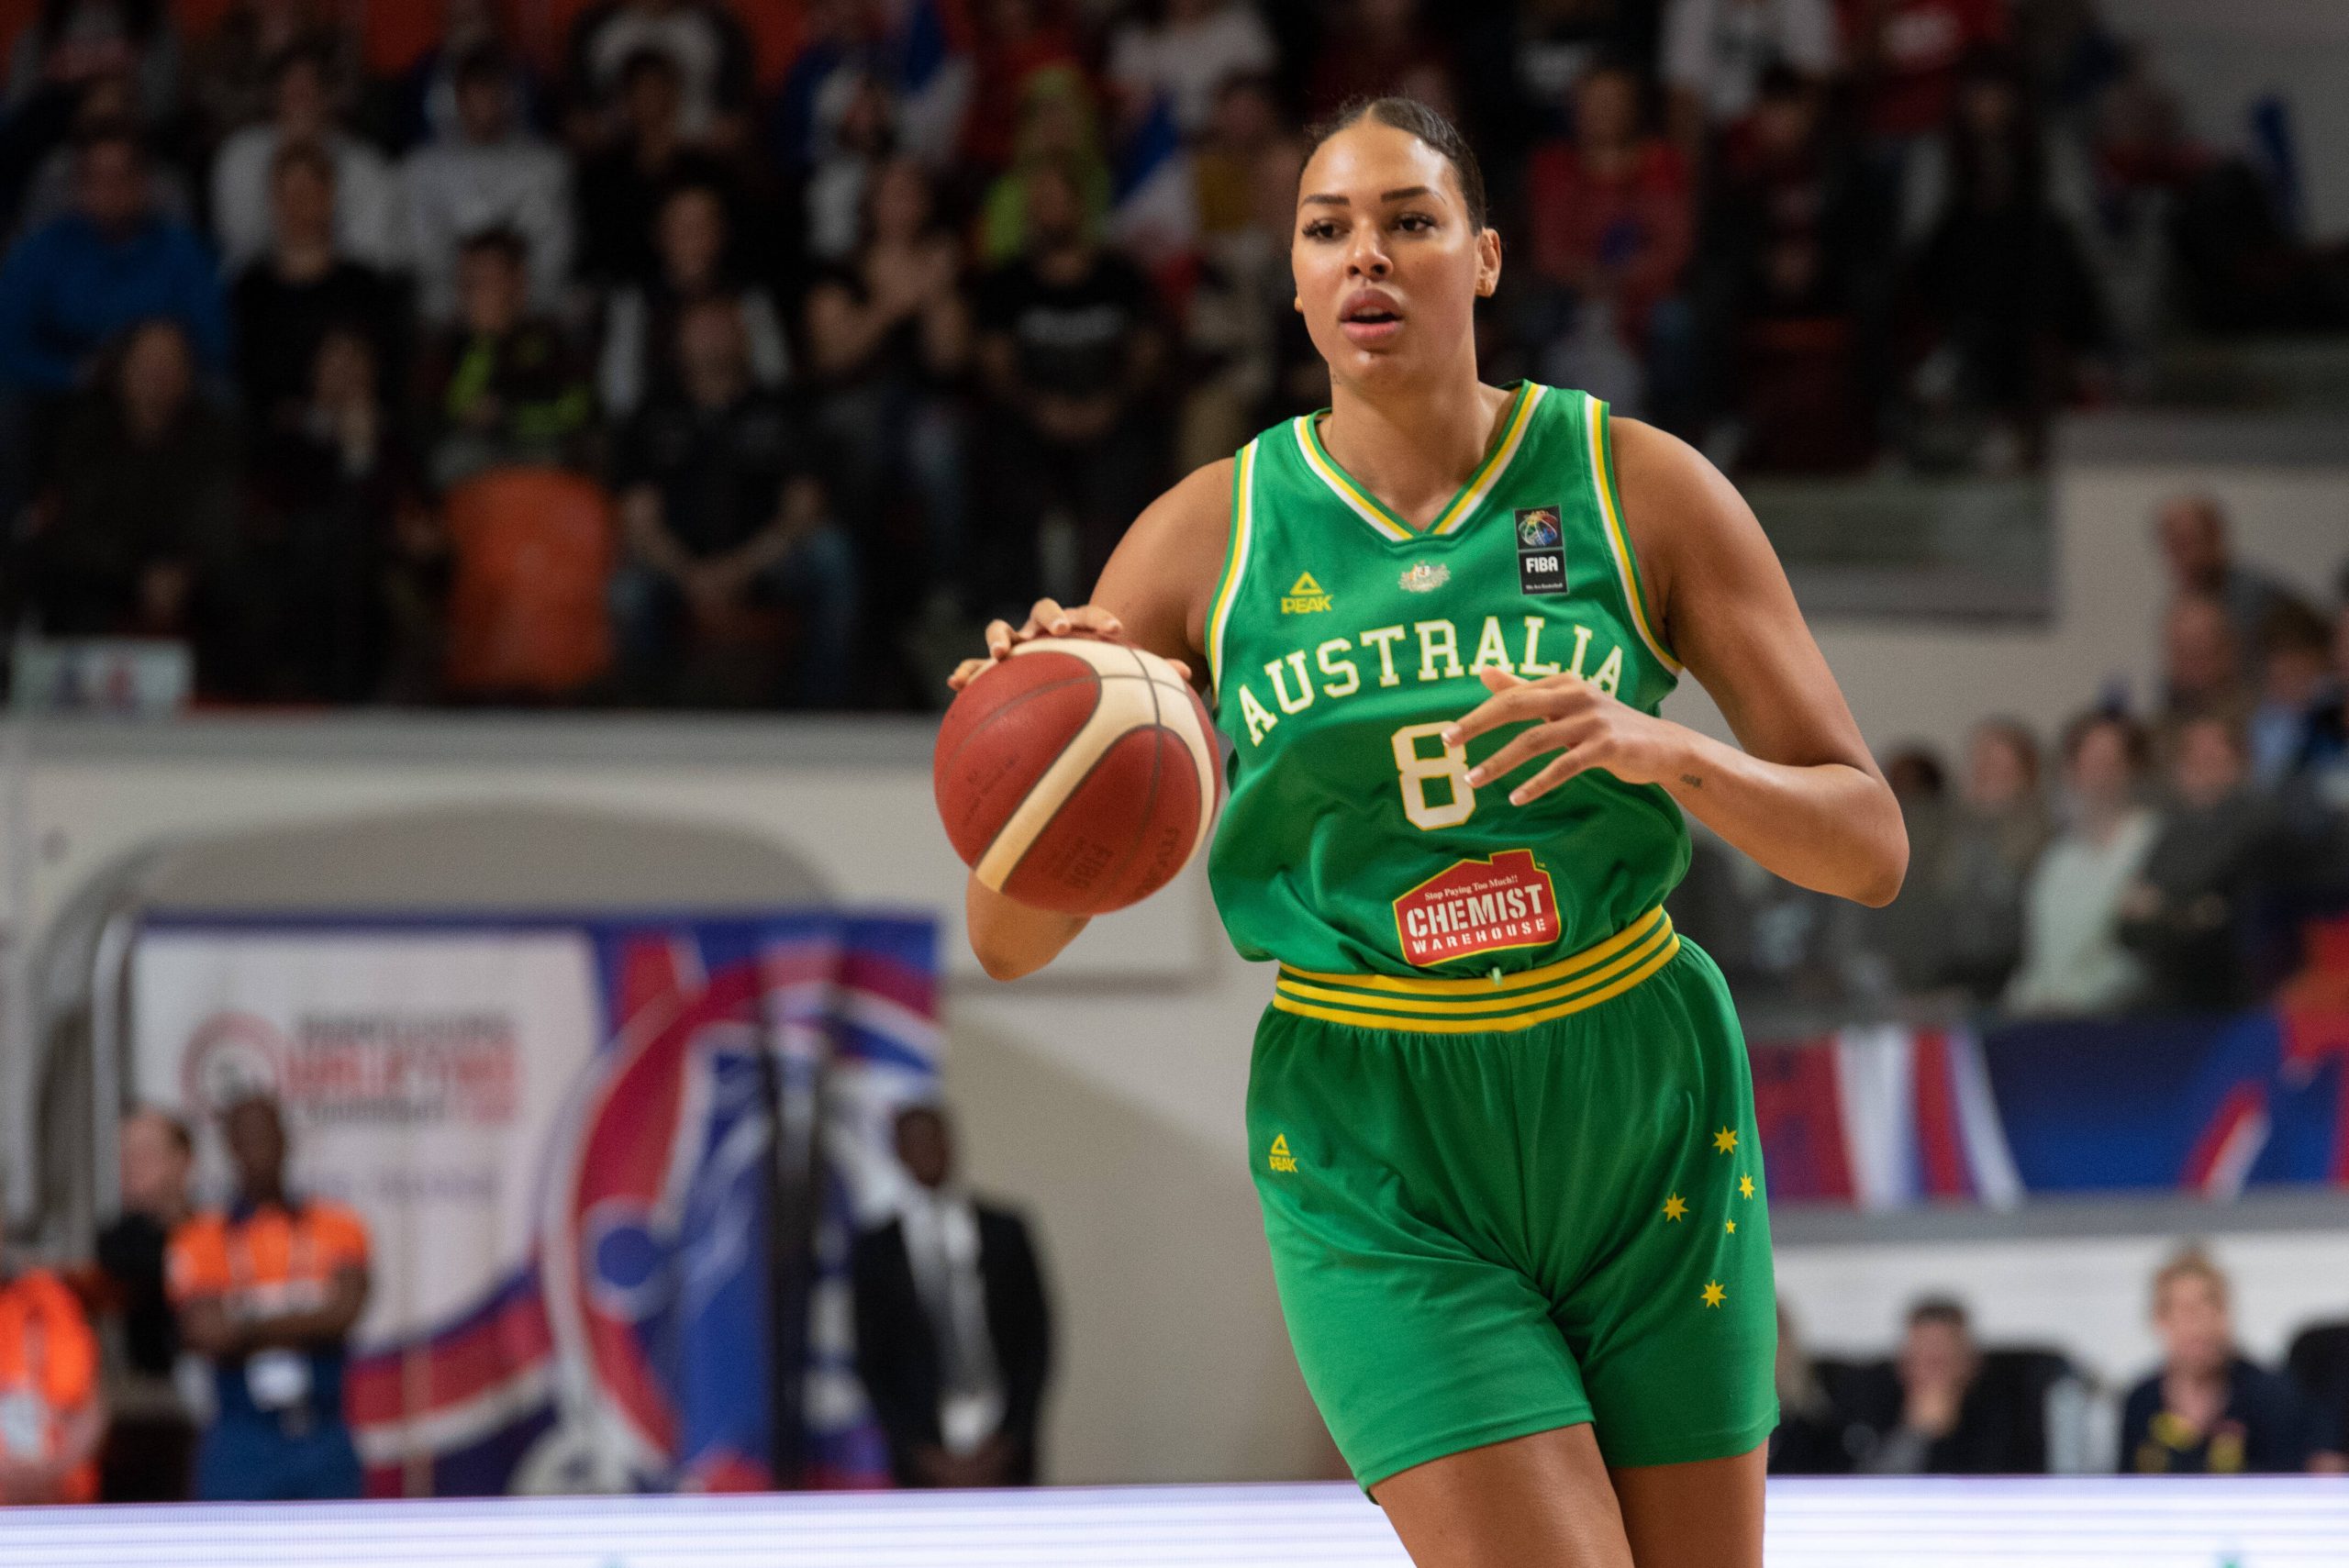 Liz Cambage is one of the tallest WNBA players in the history of the league